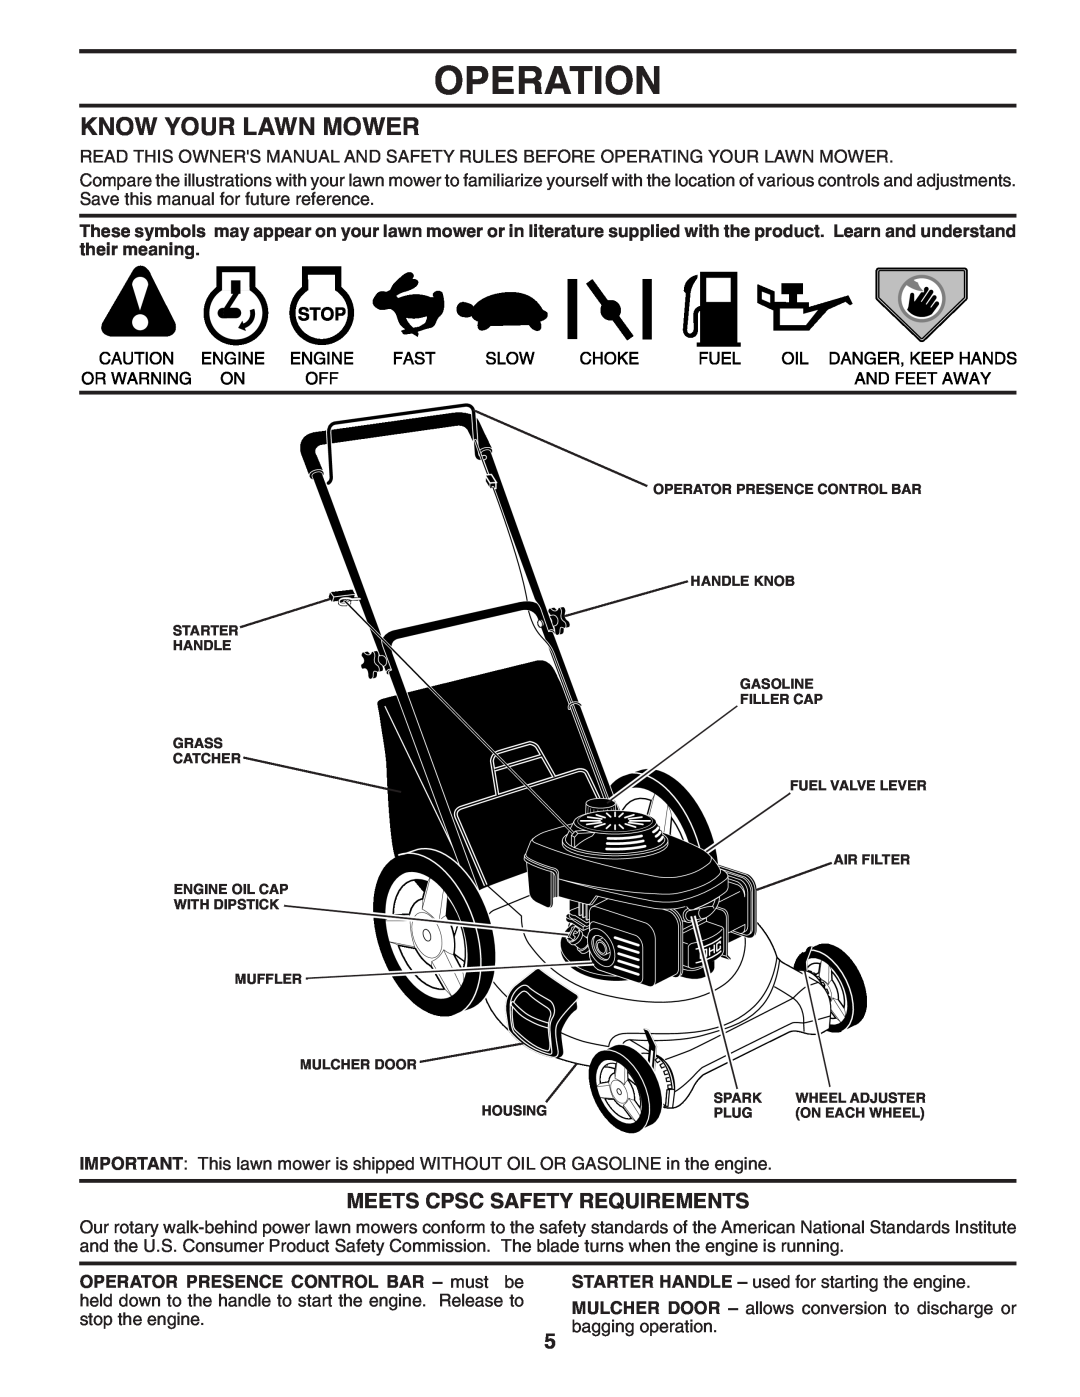 Husqvarna 7021P owner manual Operation, Know Your Lawn Mower, Meets Cpsc Safety Requirements 